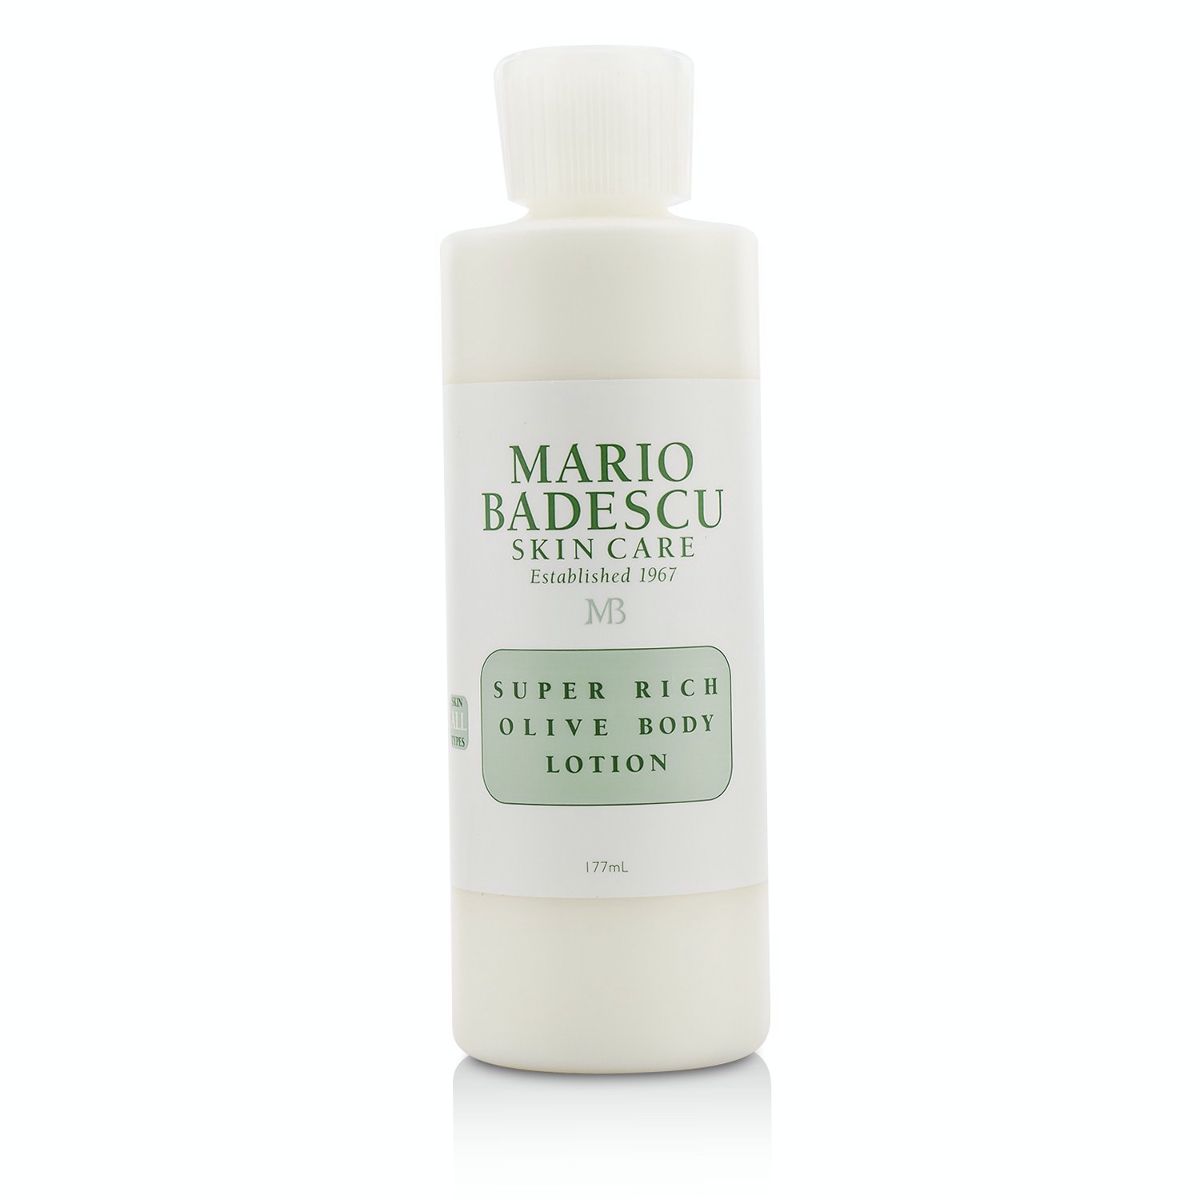 Super Rich Olive Body Lotion - For All Skin Types Mario Badescu Image